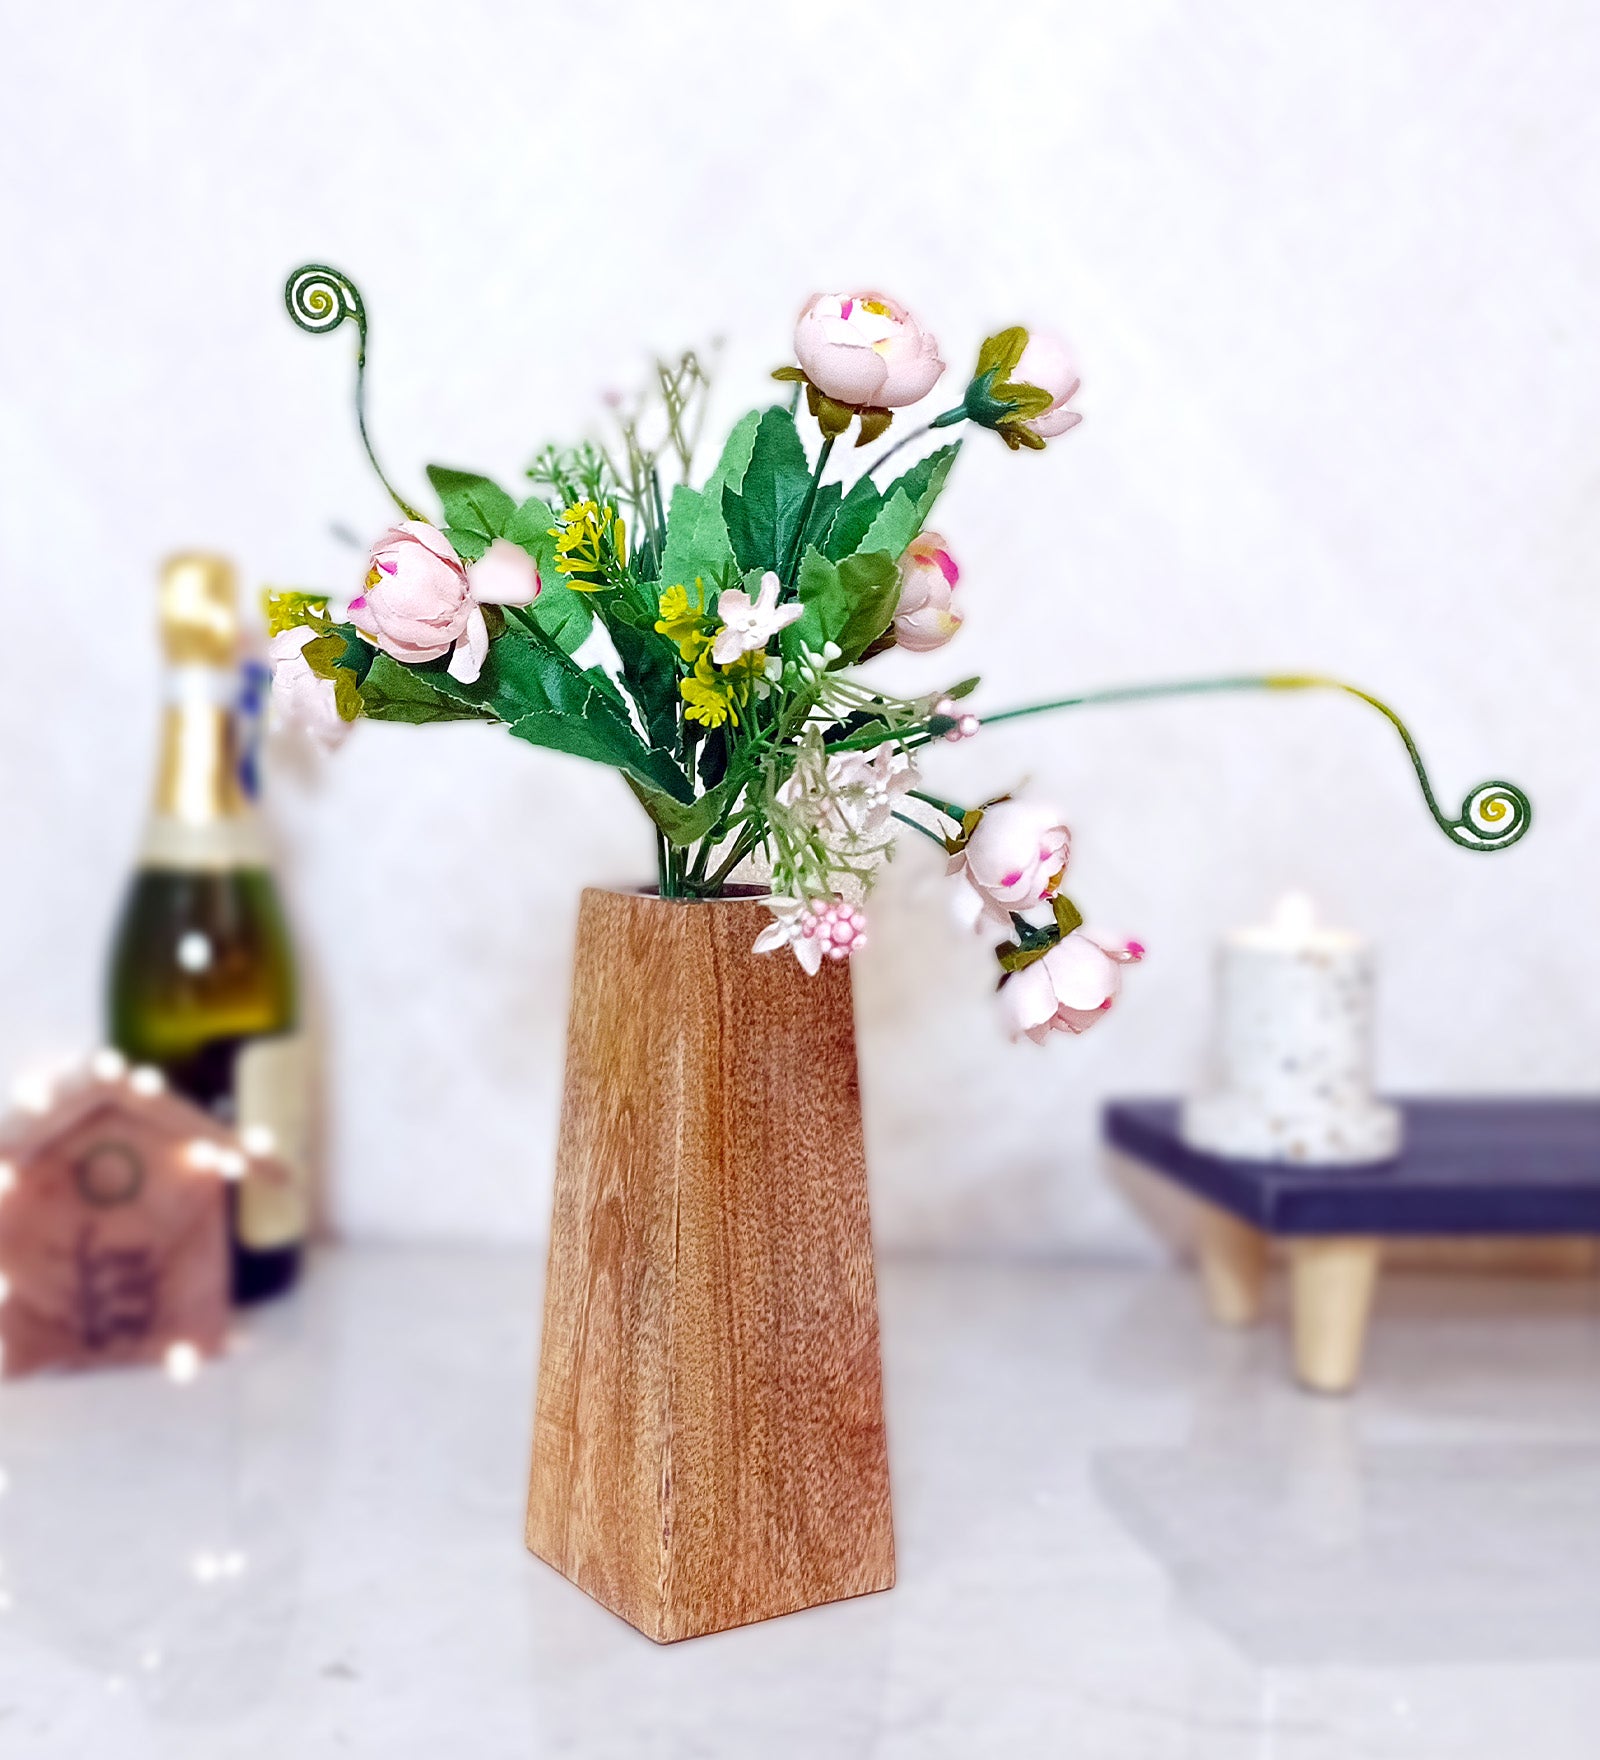 Pyramid Wooden Vase with Artificial Flowers